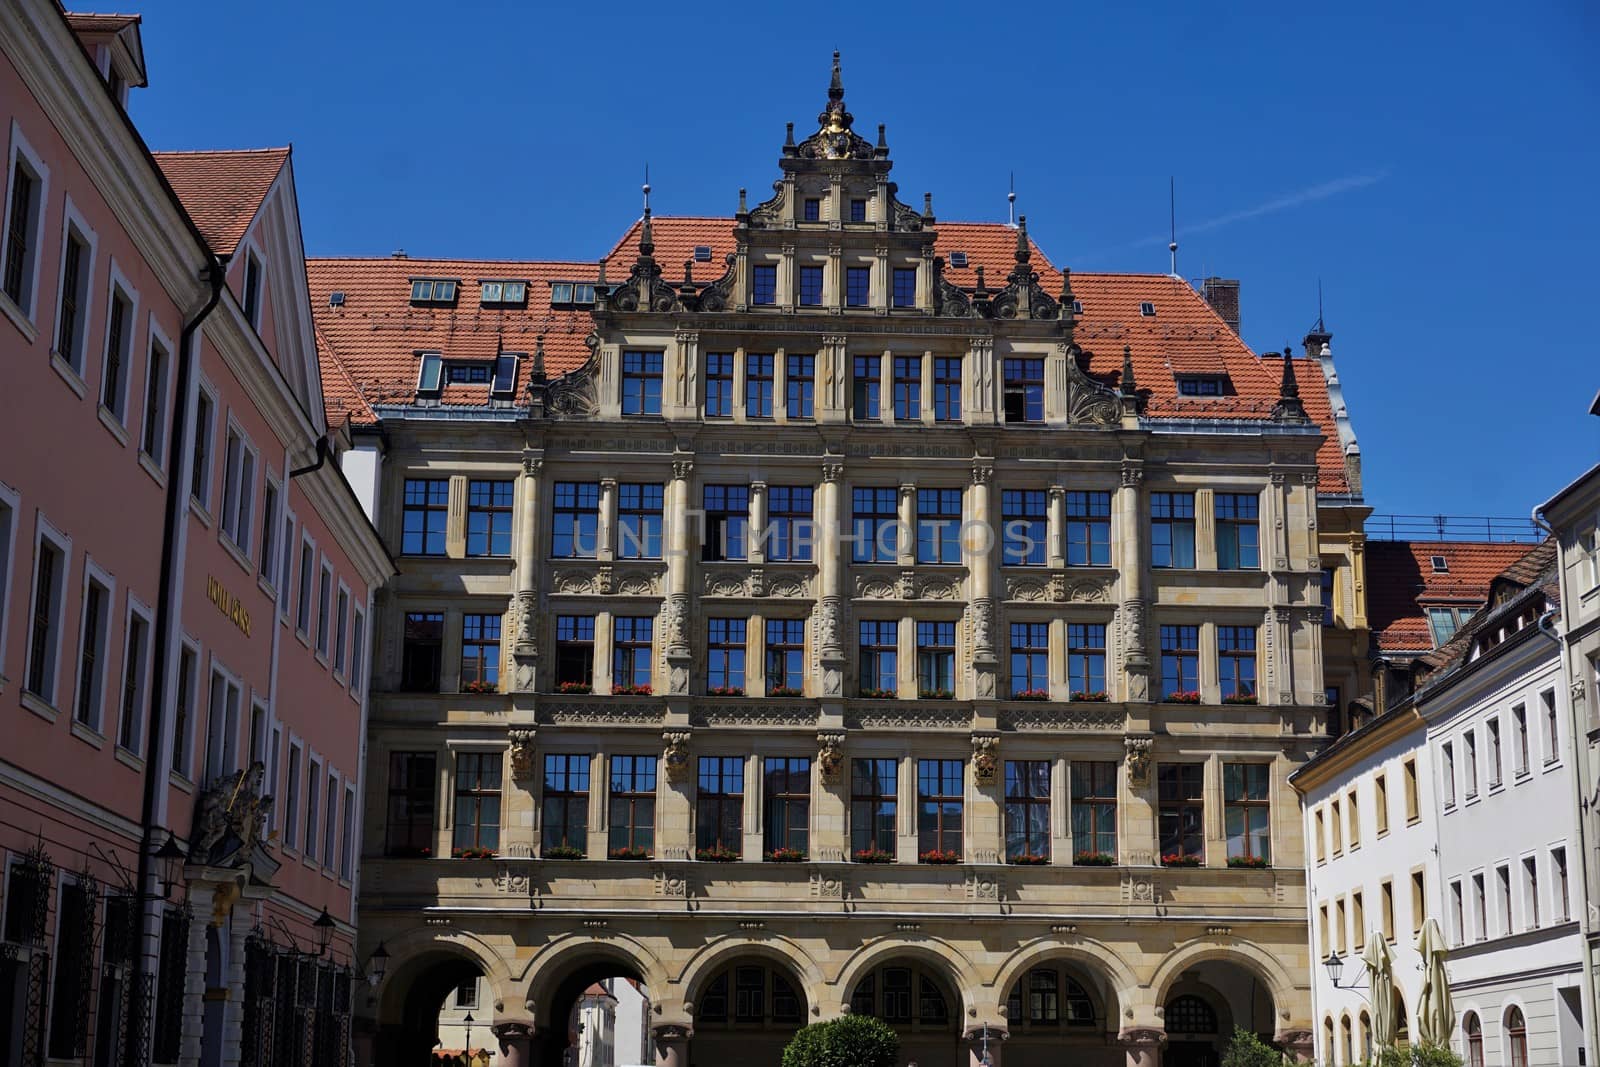 The beautiful facade of the New Town Hall of Gorlitz by pisces2386